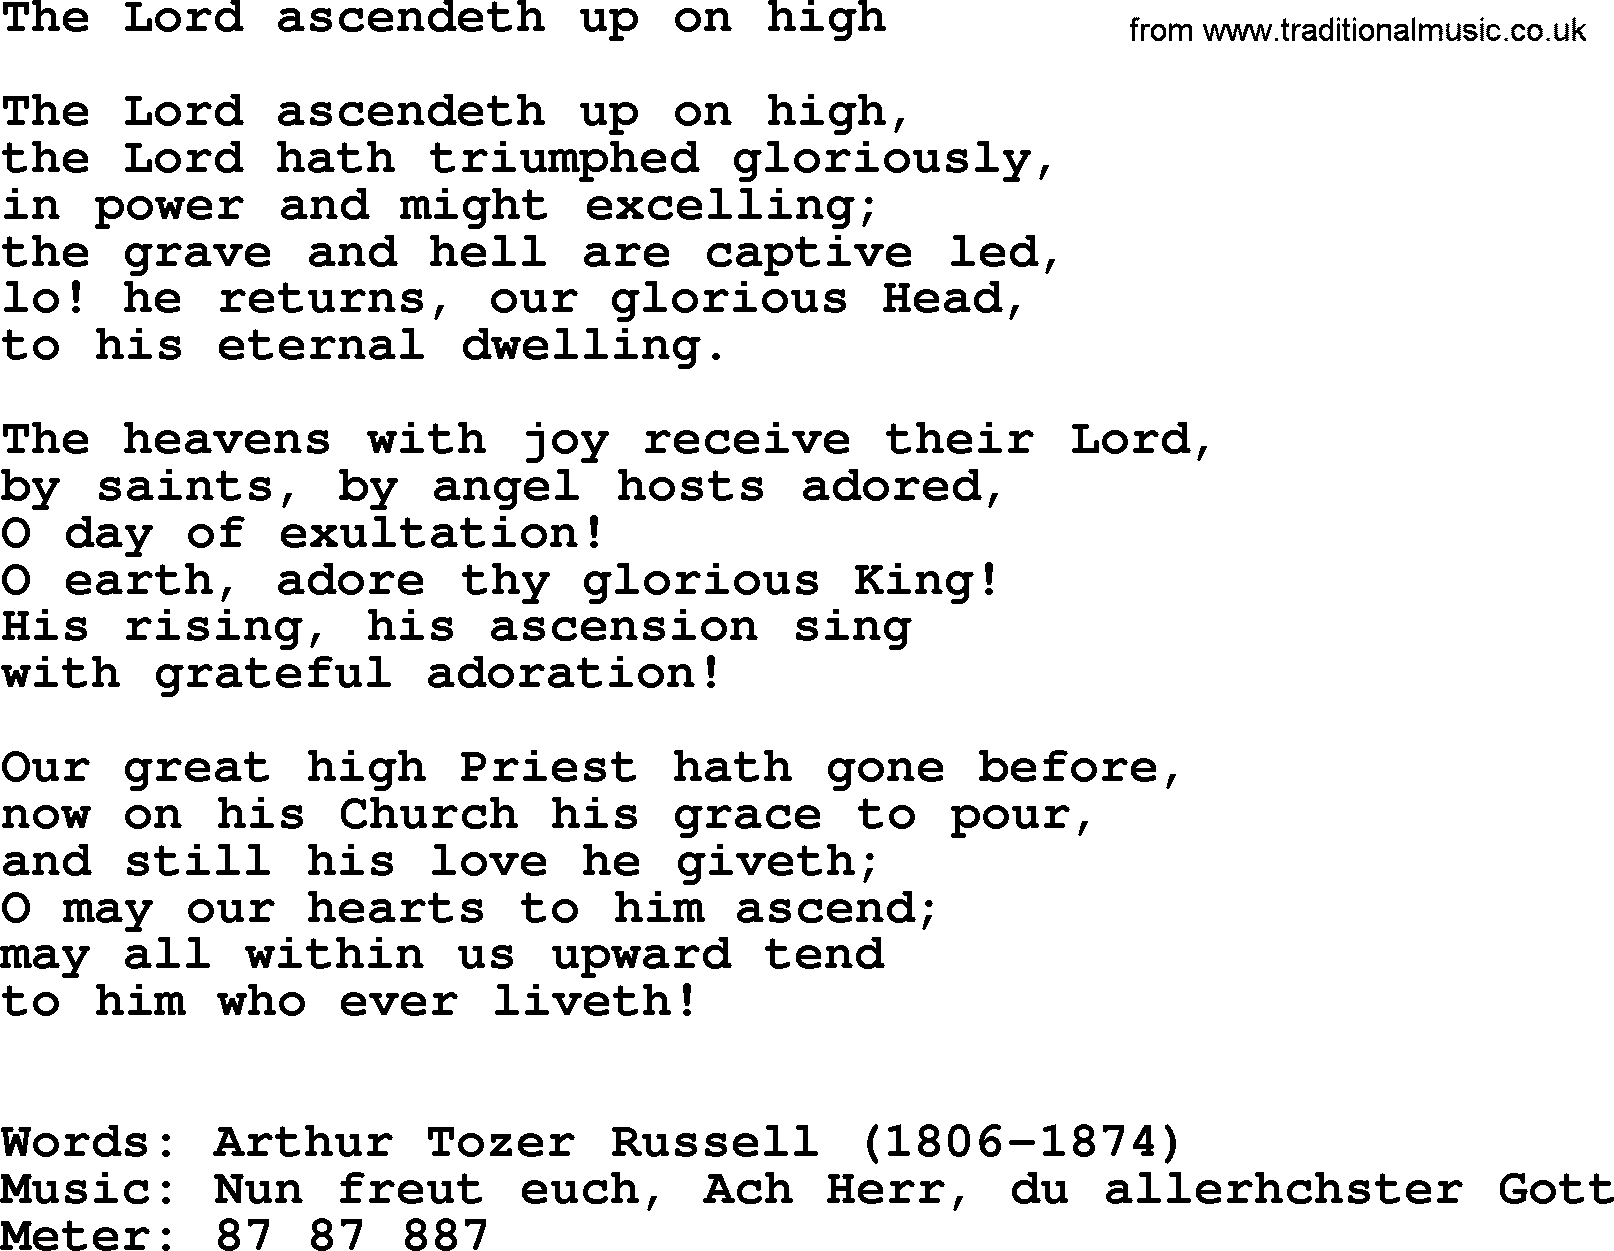 Ascensiontide Hynms collection, Hymn: The Lord Ascendeth Up On High, lyrics and PDF